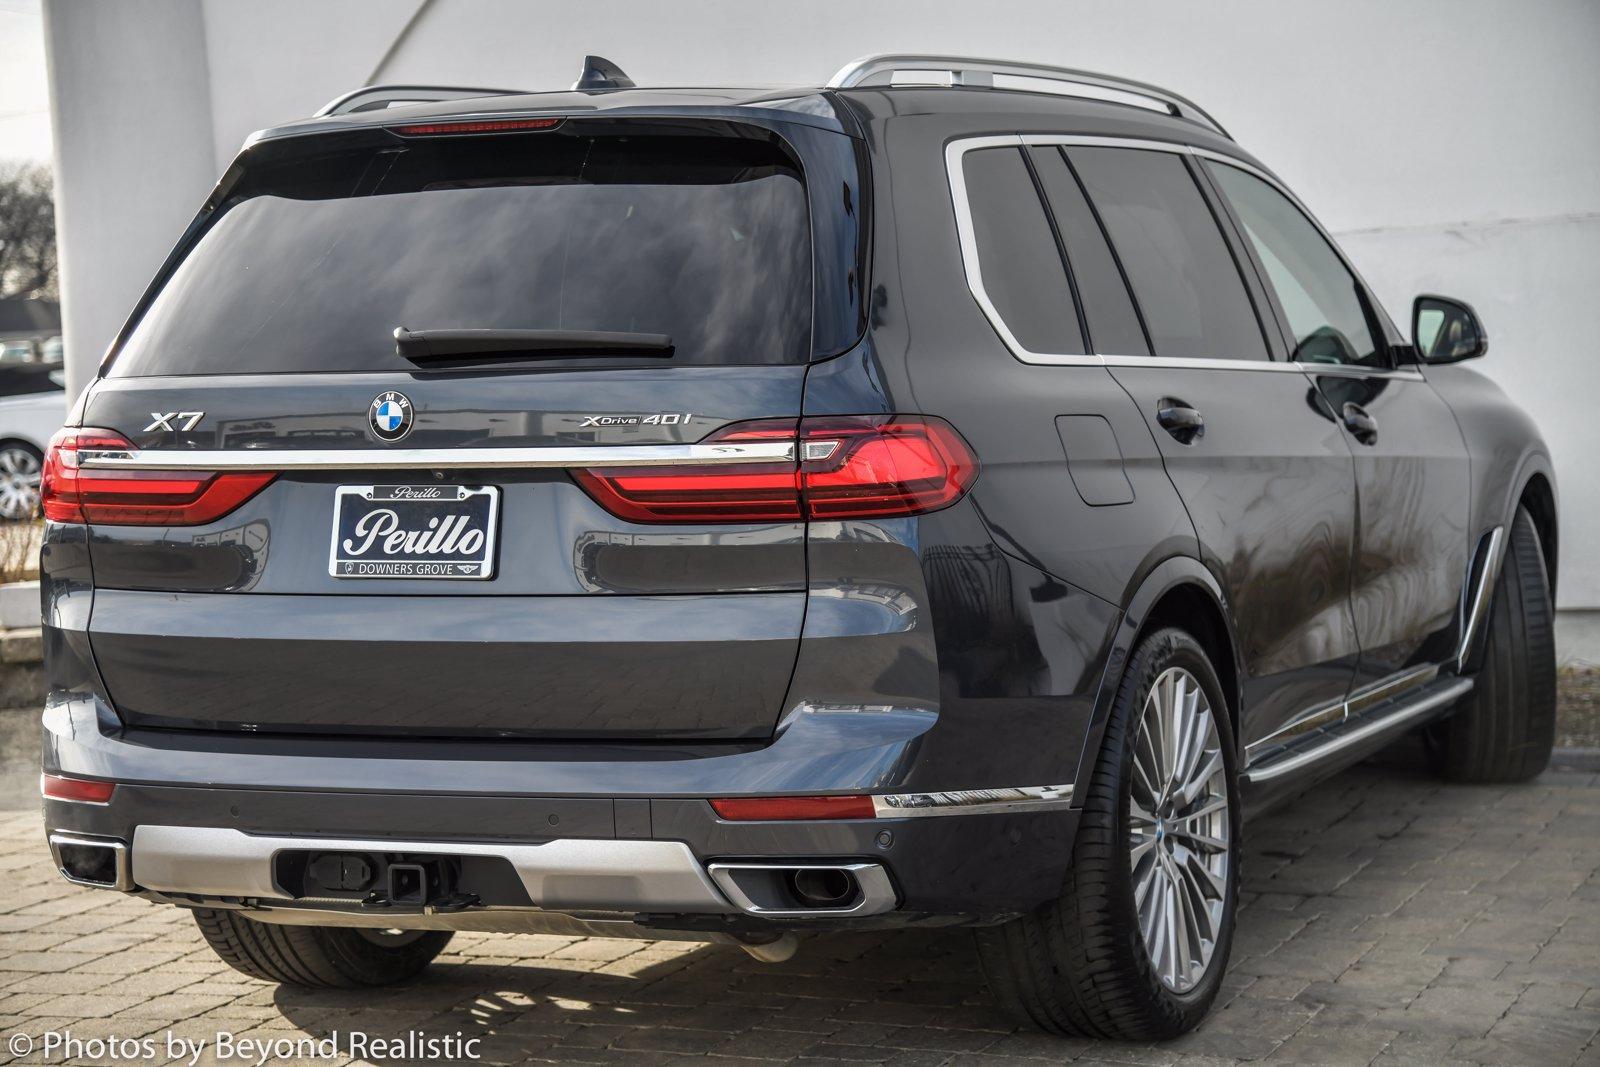 Used 2019 BMW X7 xDrive40i Premium, 3rd Row, Rear Seat Entertainment | Downers Grove, IL